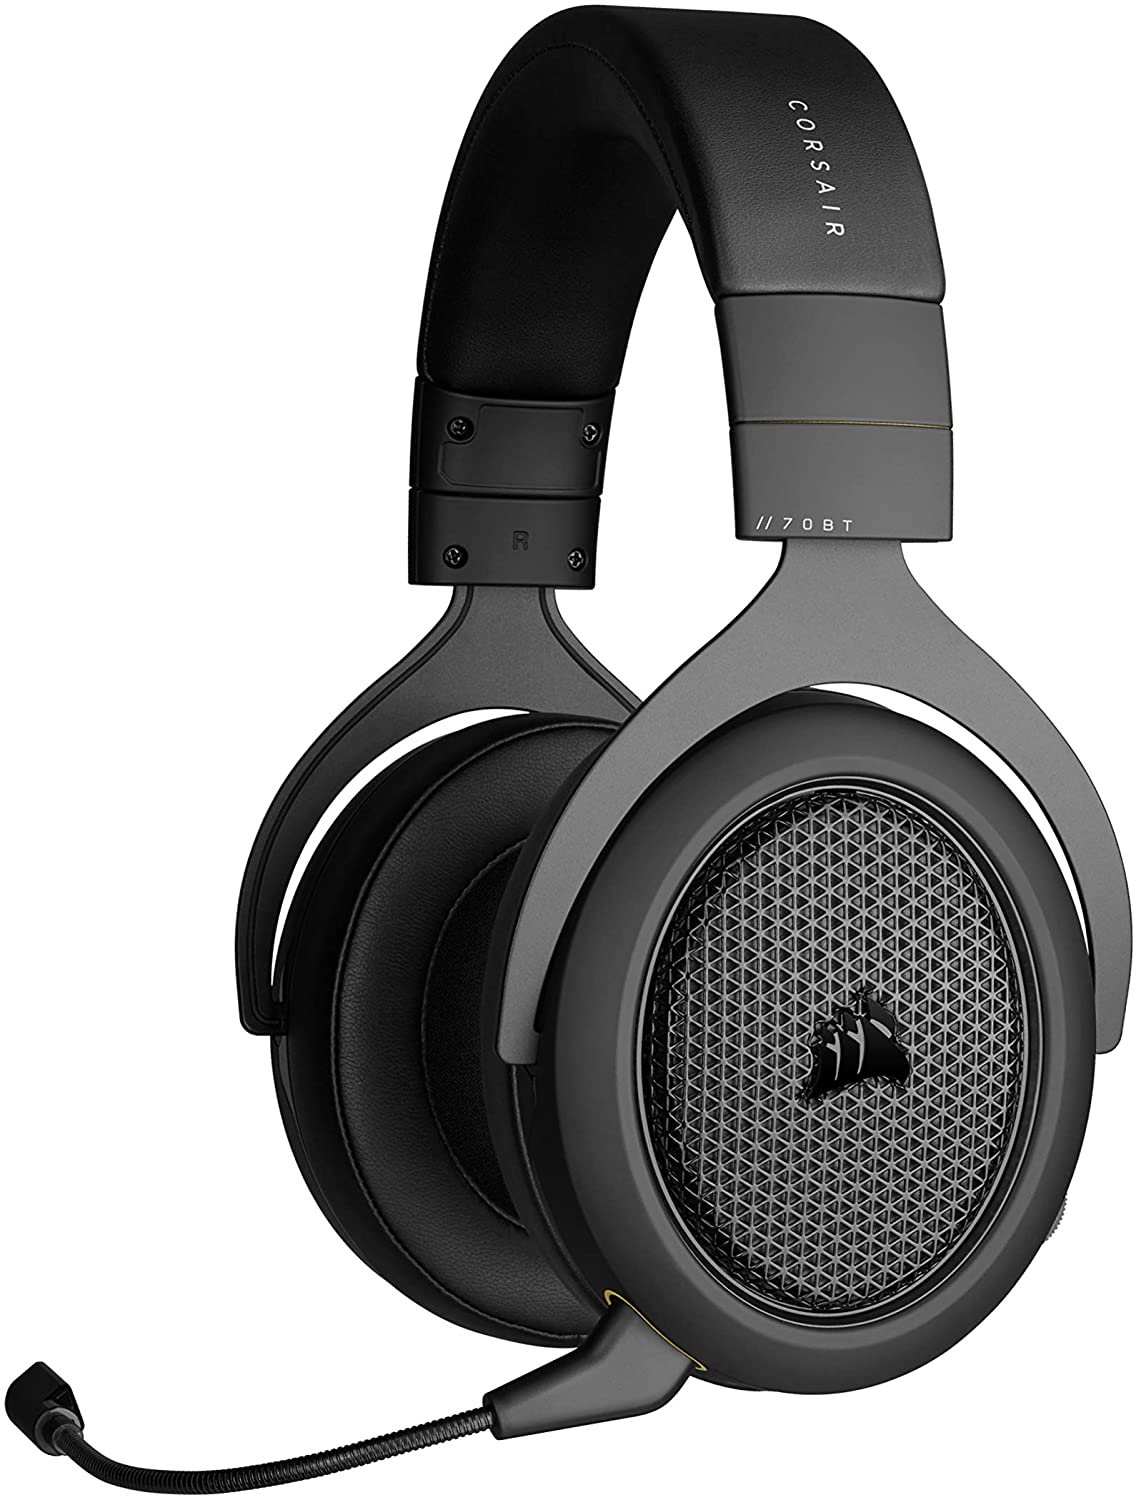 CORSAIR HS70 wired stereo Gaming Headset with Bluetooth (Black) - $79.99 + FS